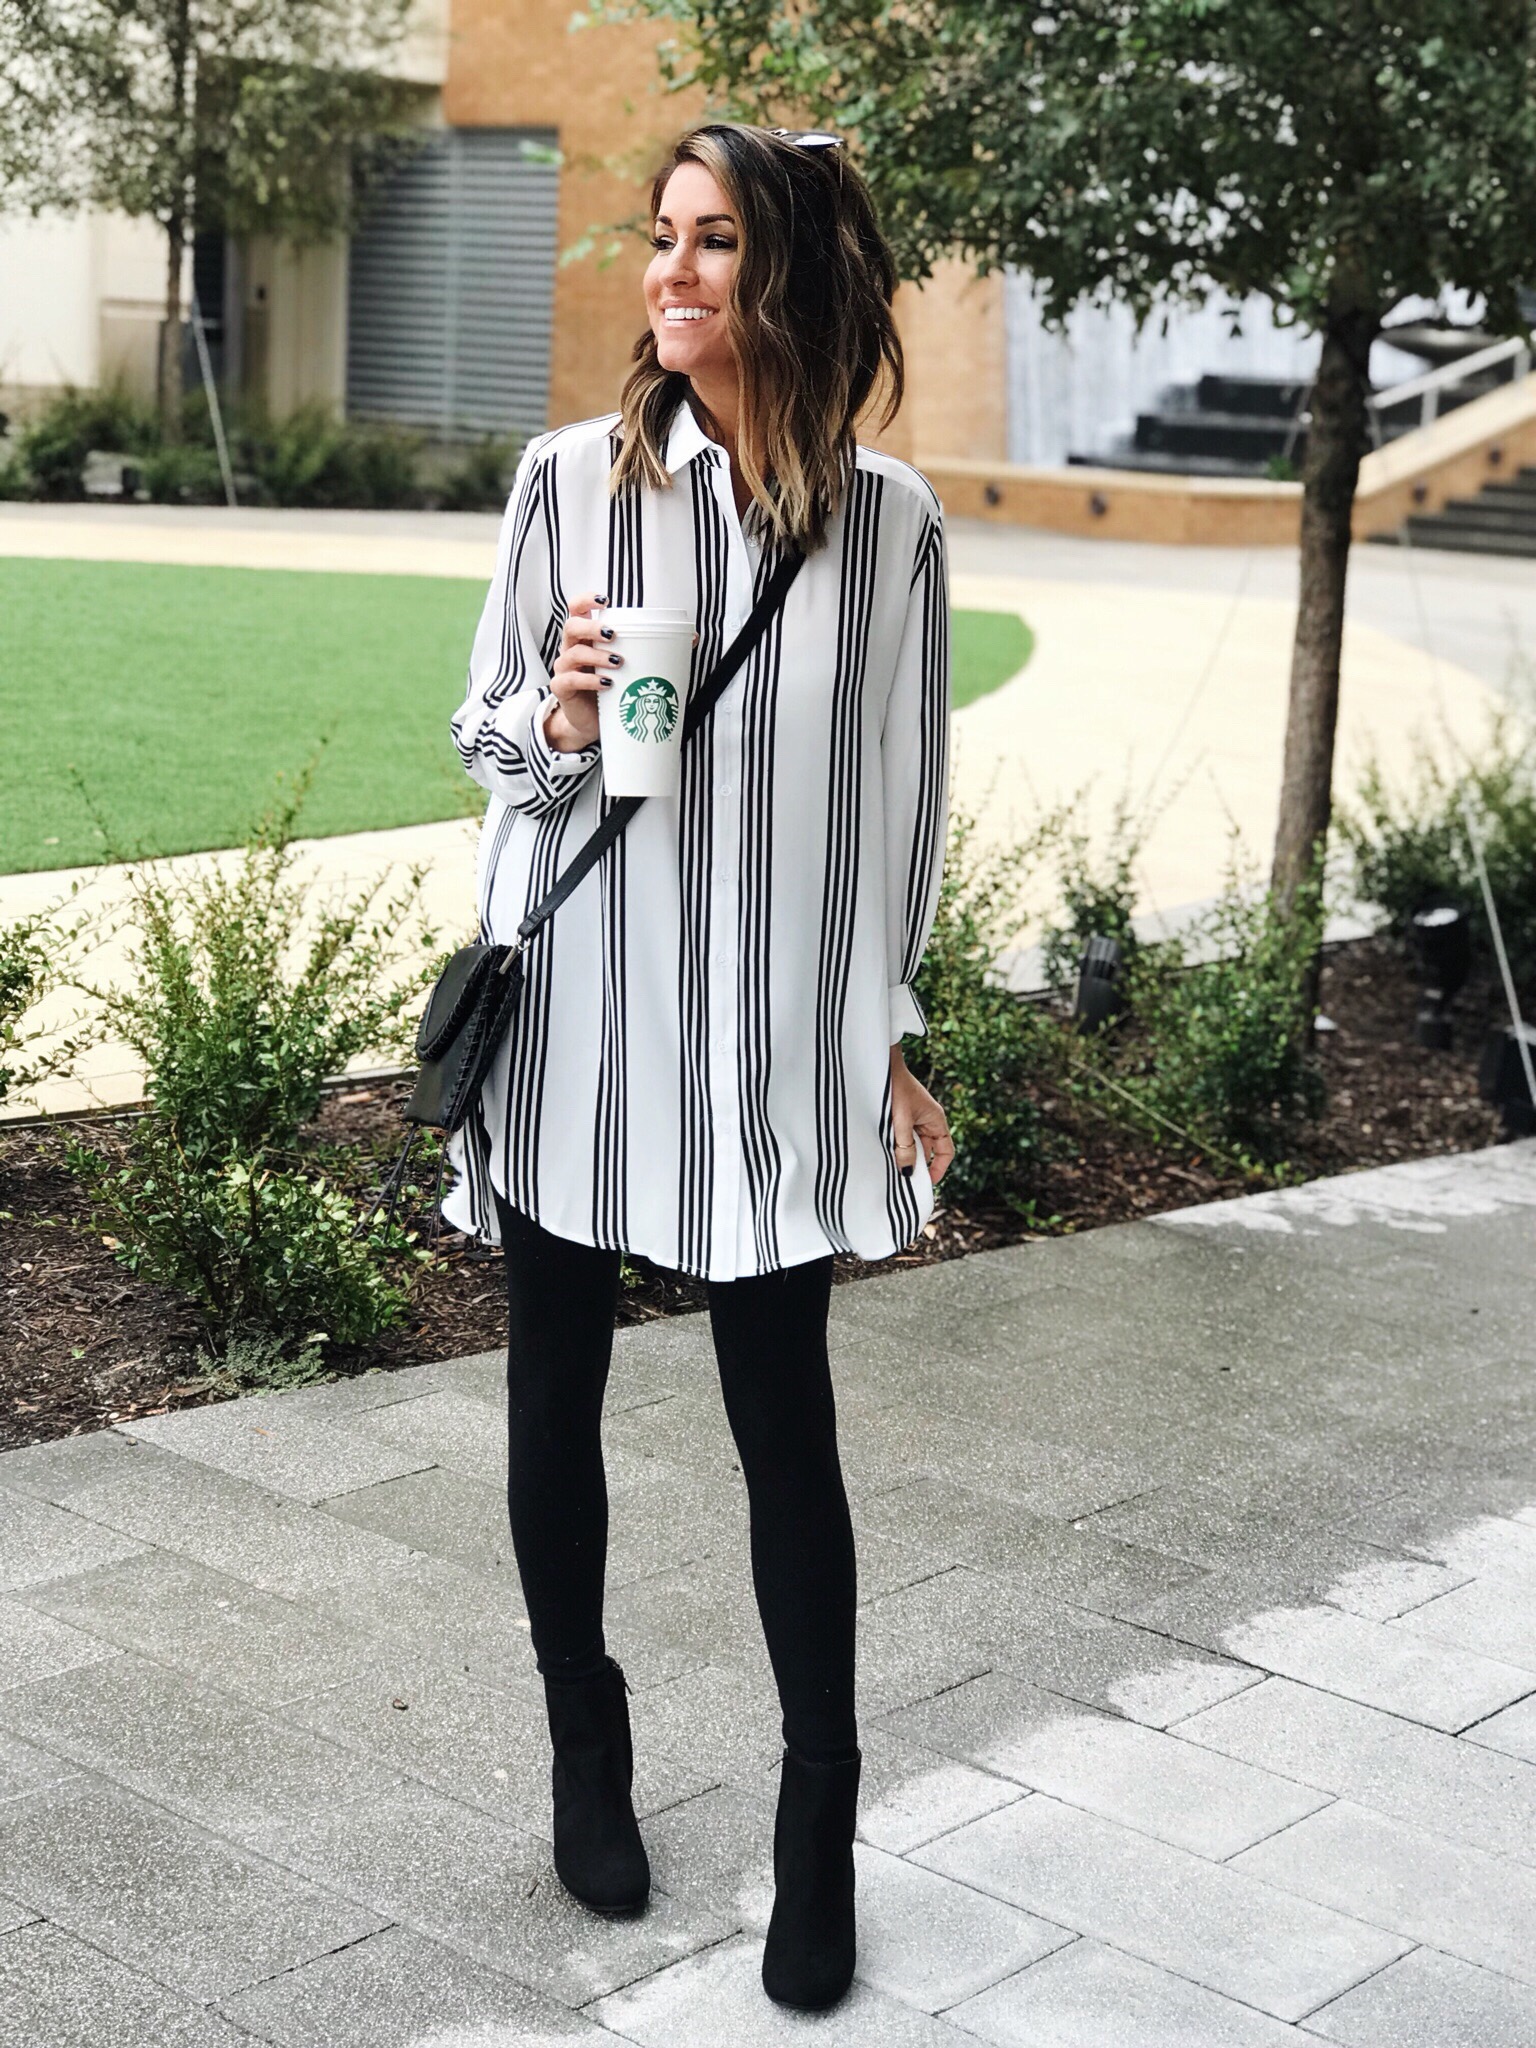 dresses to wear with leggings and booties